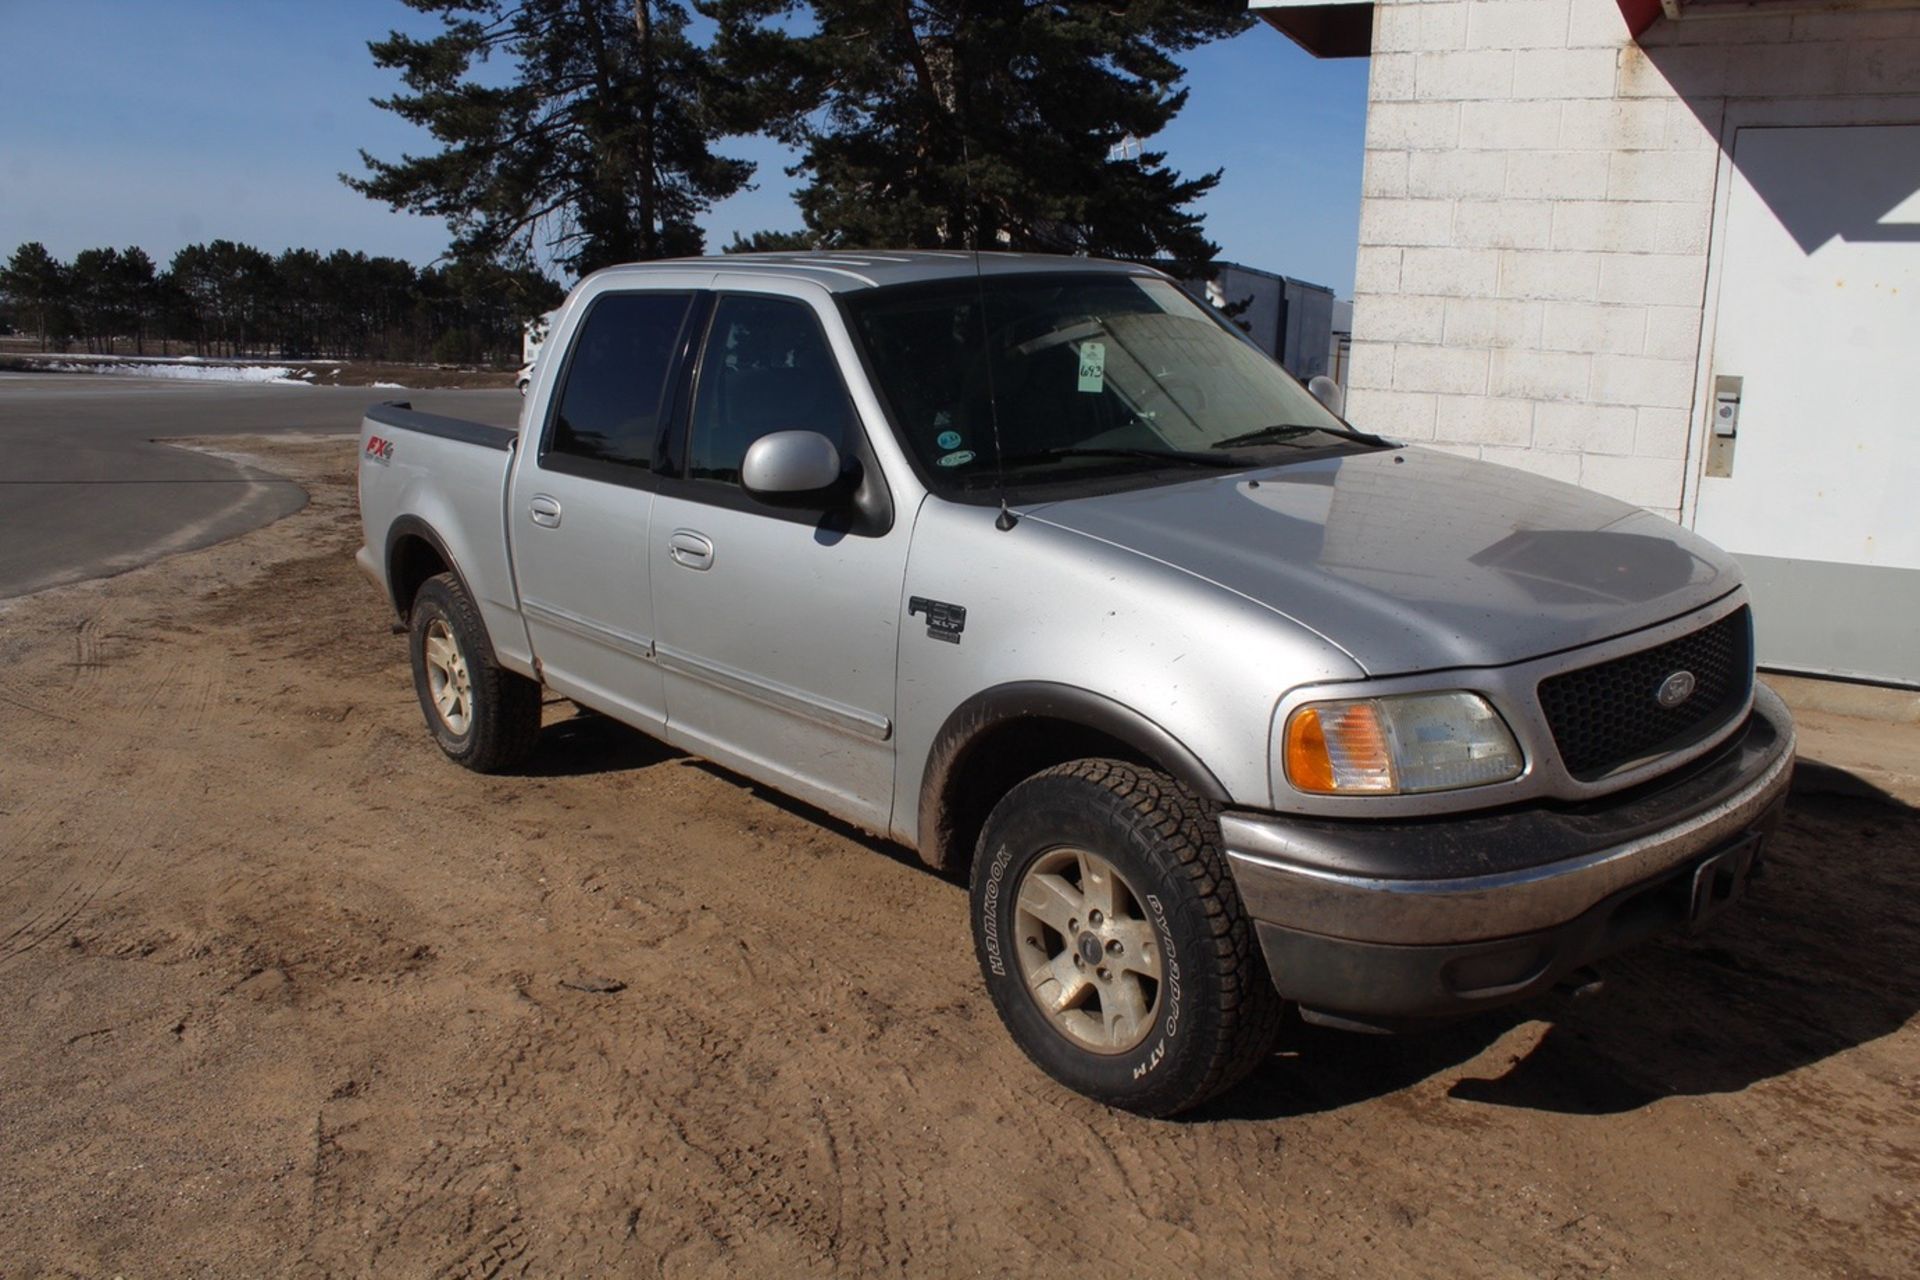 2003 Ford F150 Pickup, VIN 1FTRW08L53KC09876 | Rigging: Hand Carry